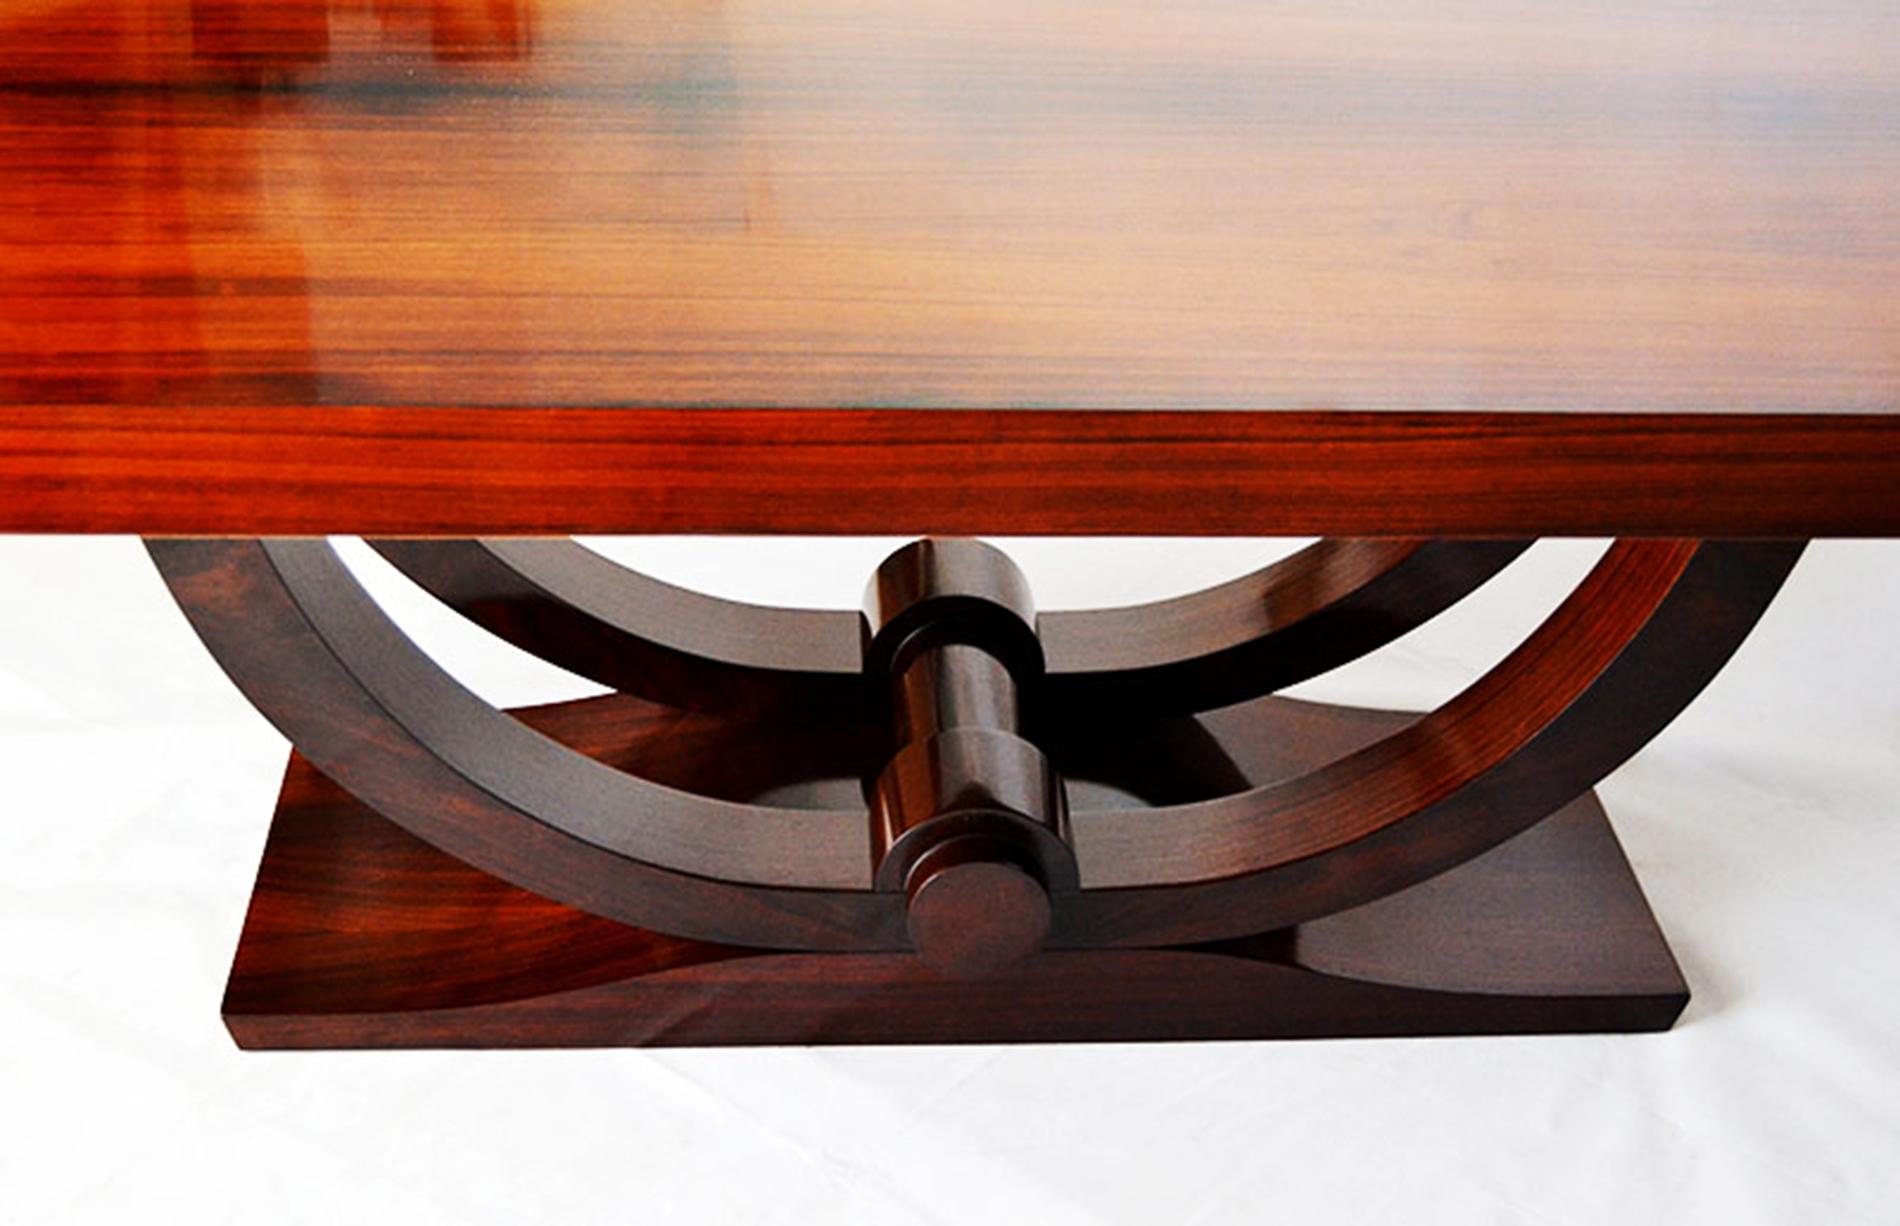 Mid-20th Century Art Deco Table with Double Arch Base in Extendable Indian Rosewood 1930s, France For Sale